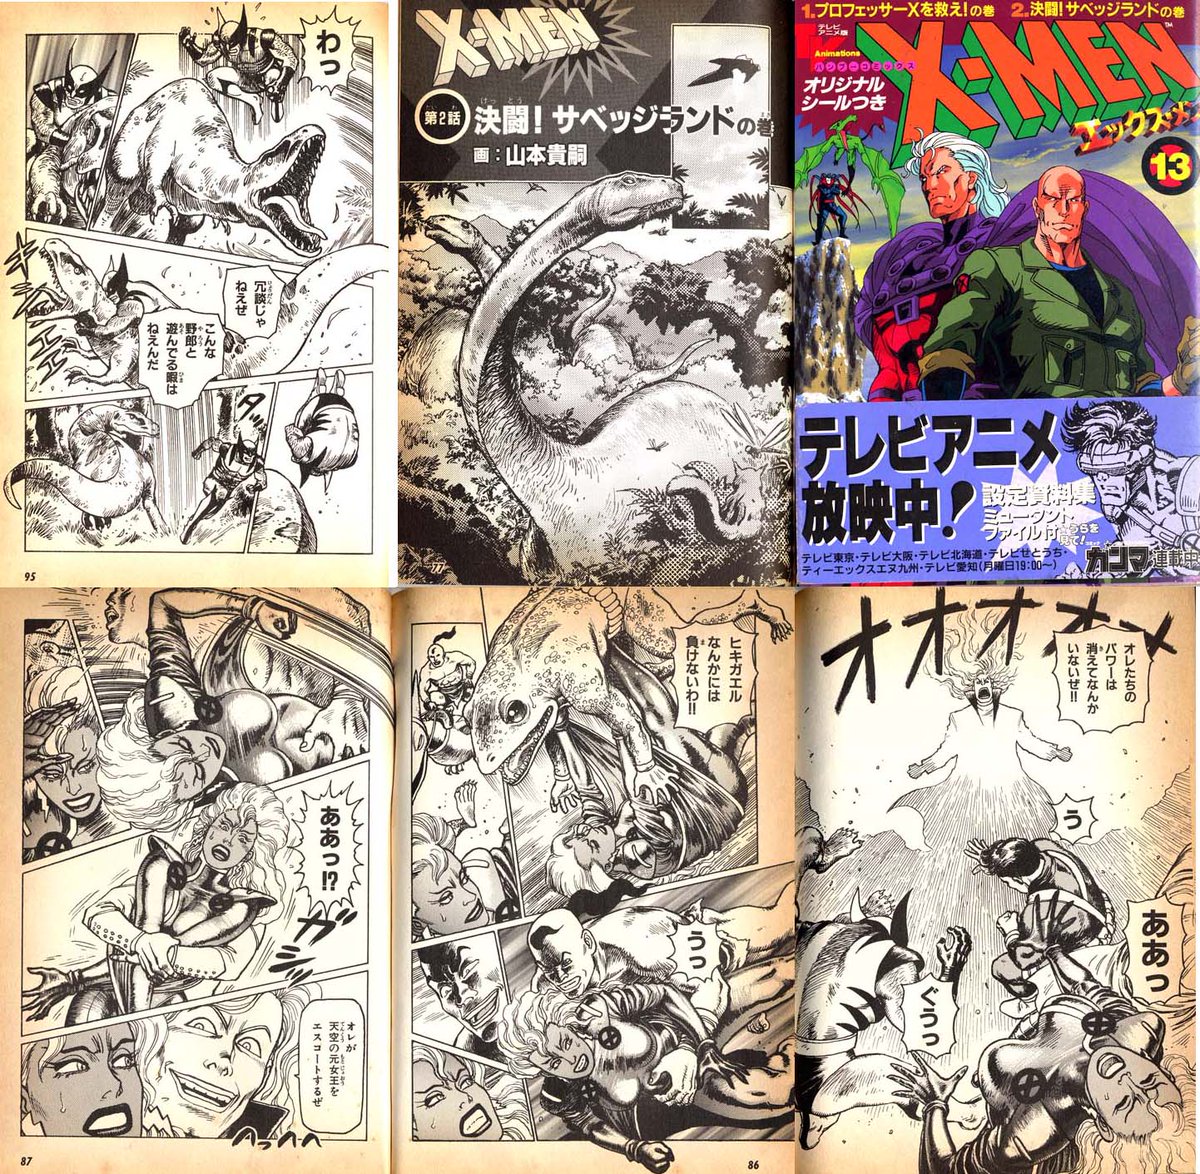 Recently, I have increased the number of overseas followers, so I would like to introduce myself. I'm reposting a part of the Japanese version of X-Men (comic version of the anime, 1995) that I drew a long time ago (the color cover is not my drawing)